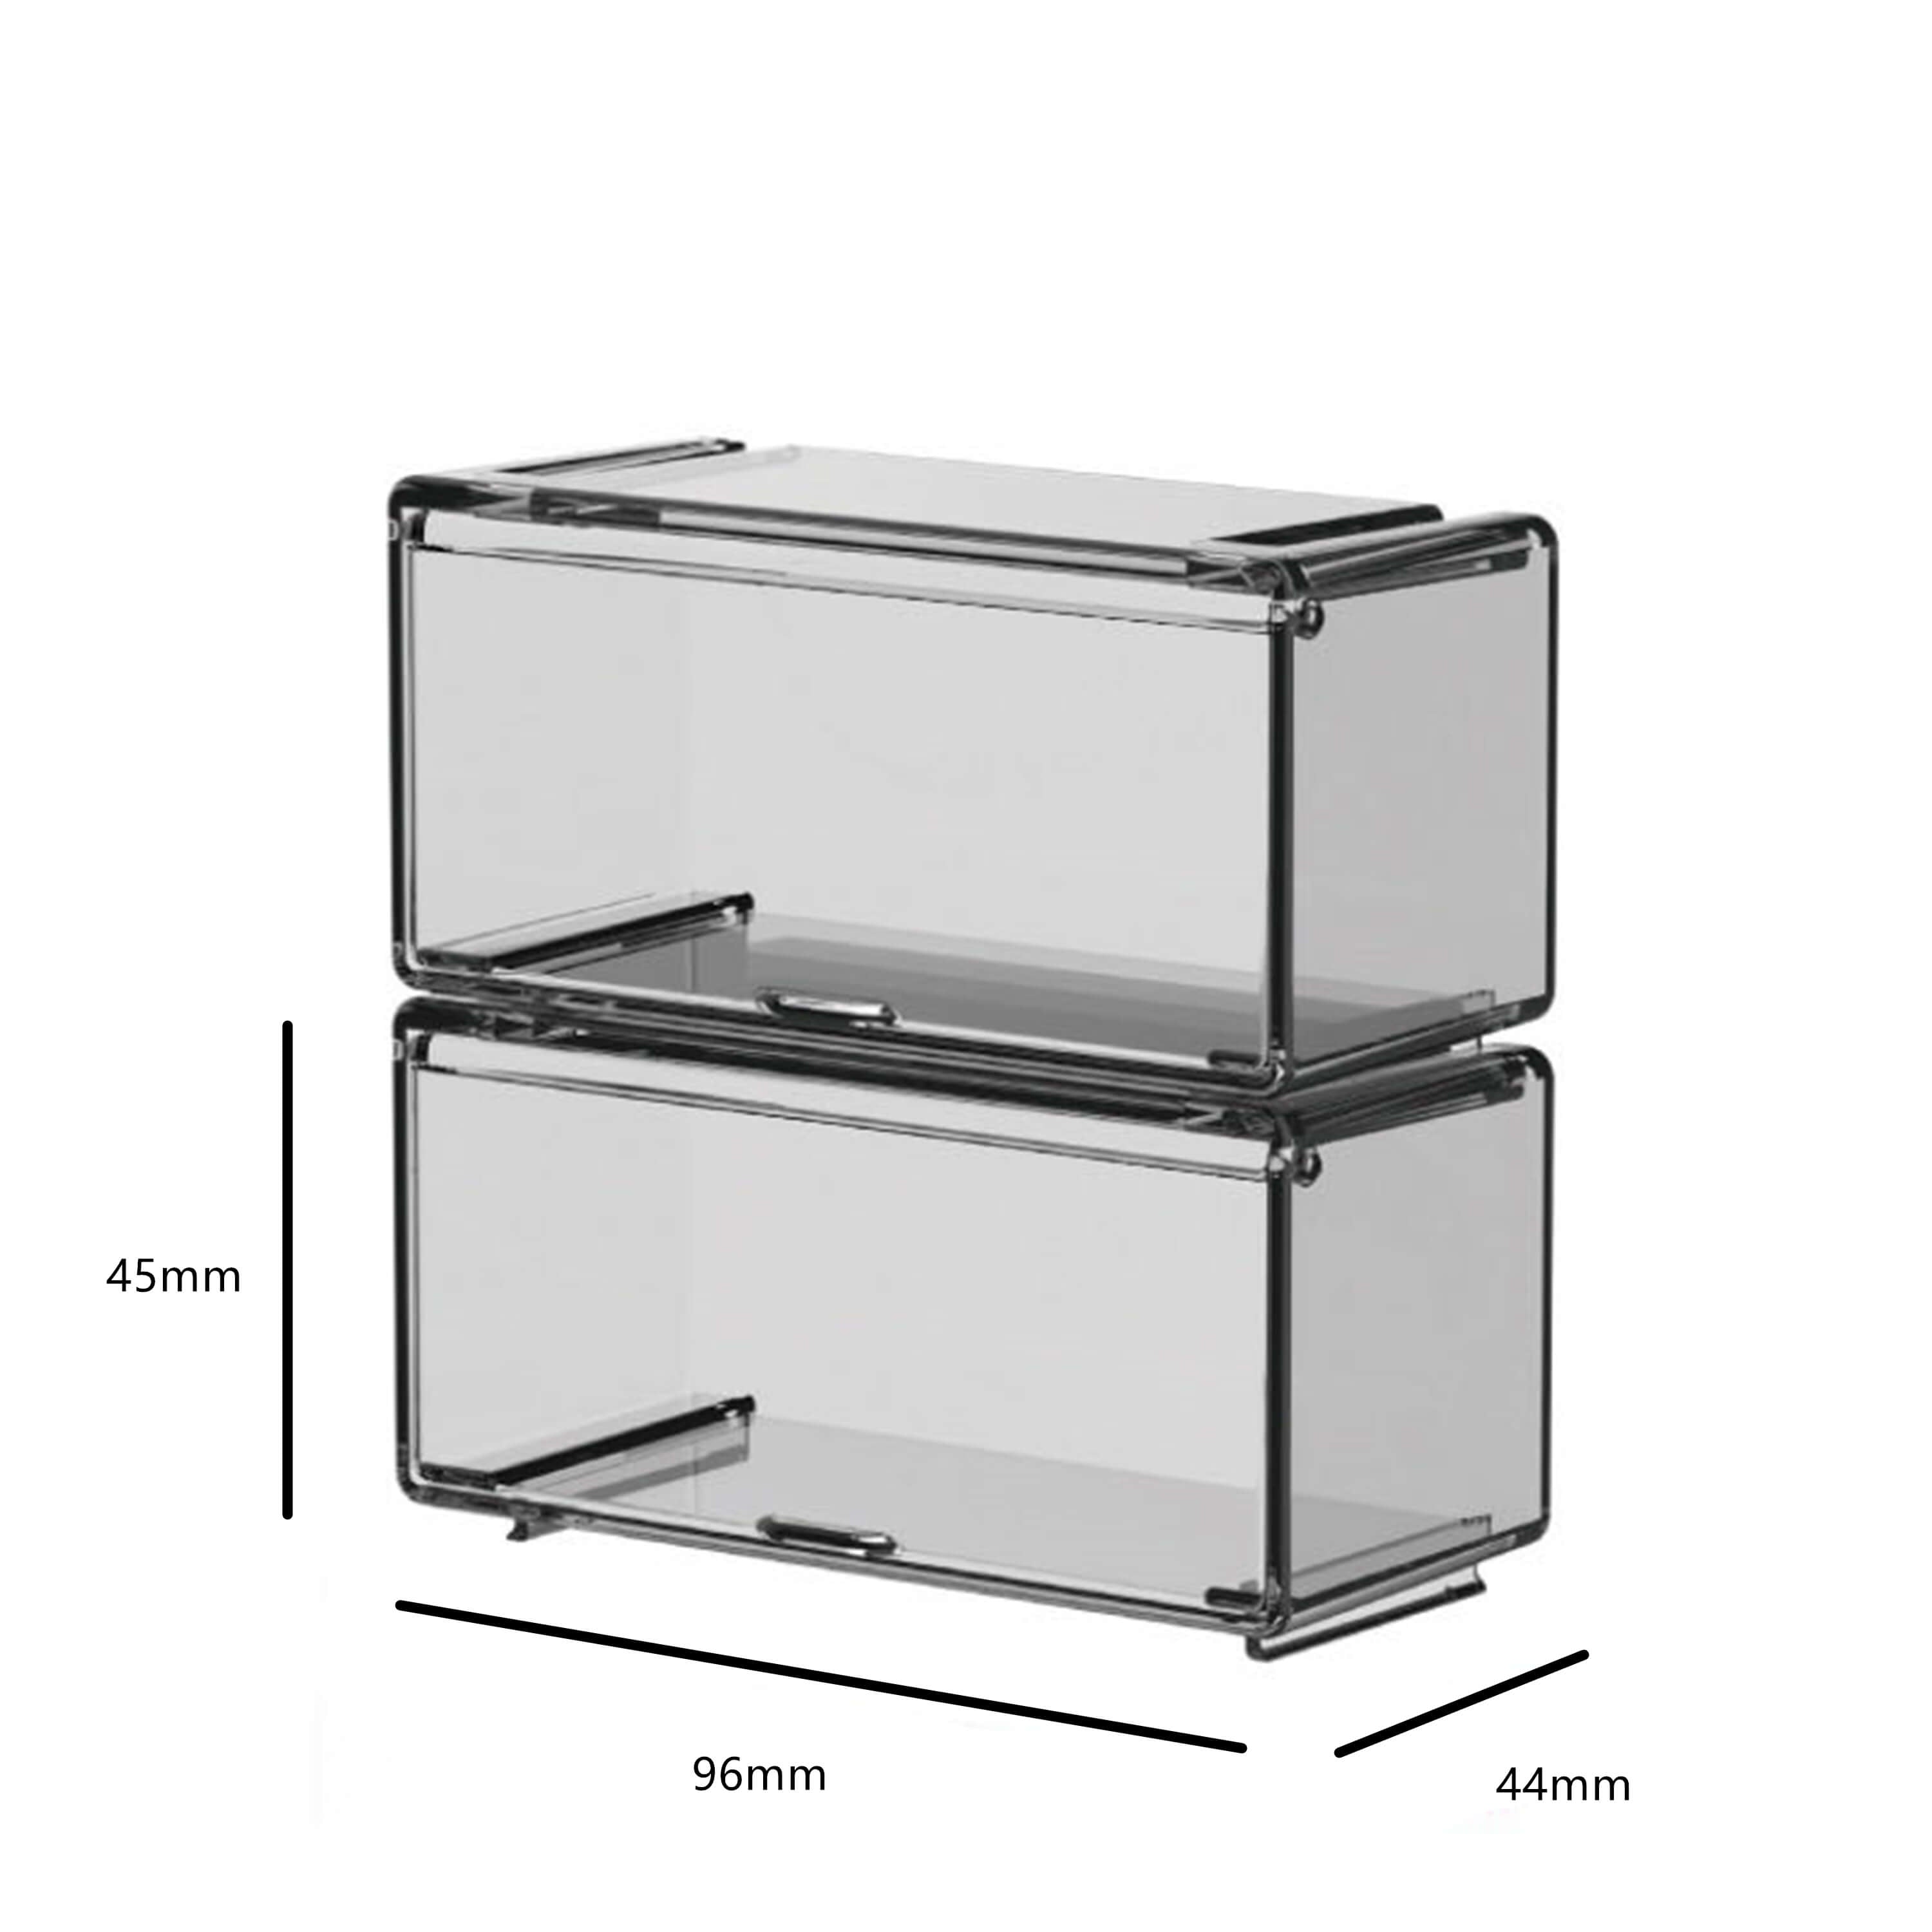 1:64 Scale Stackable 5 Car Display Case - 164model